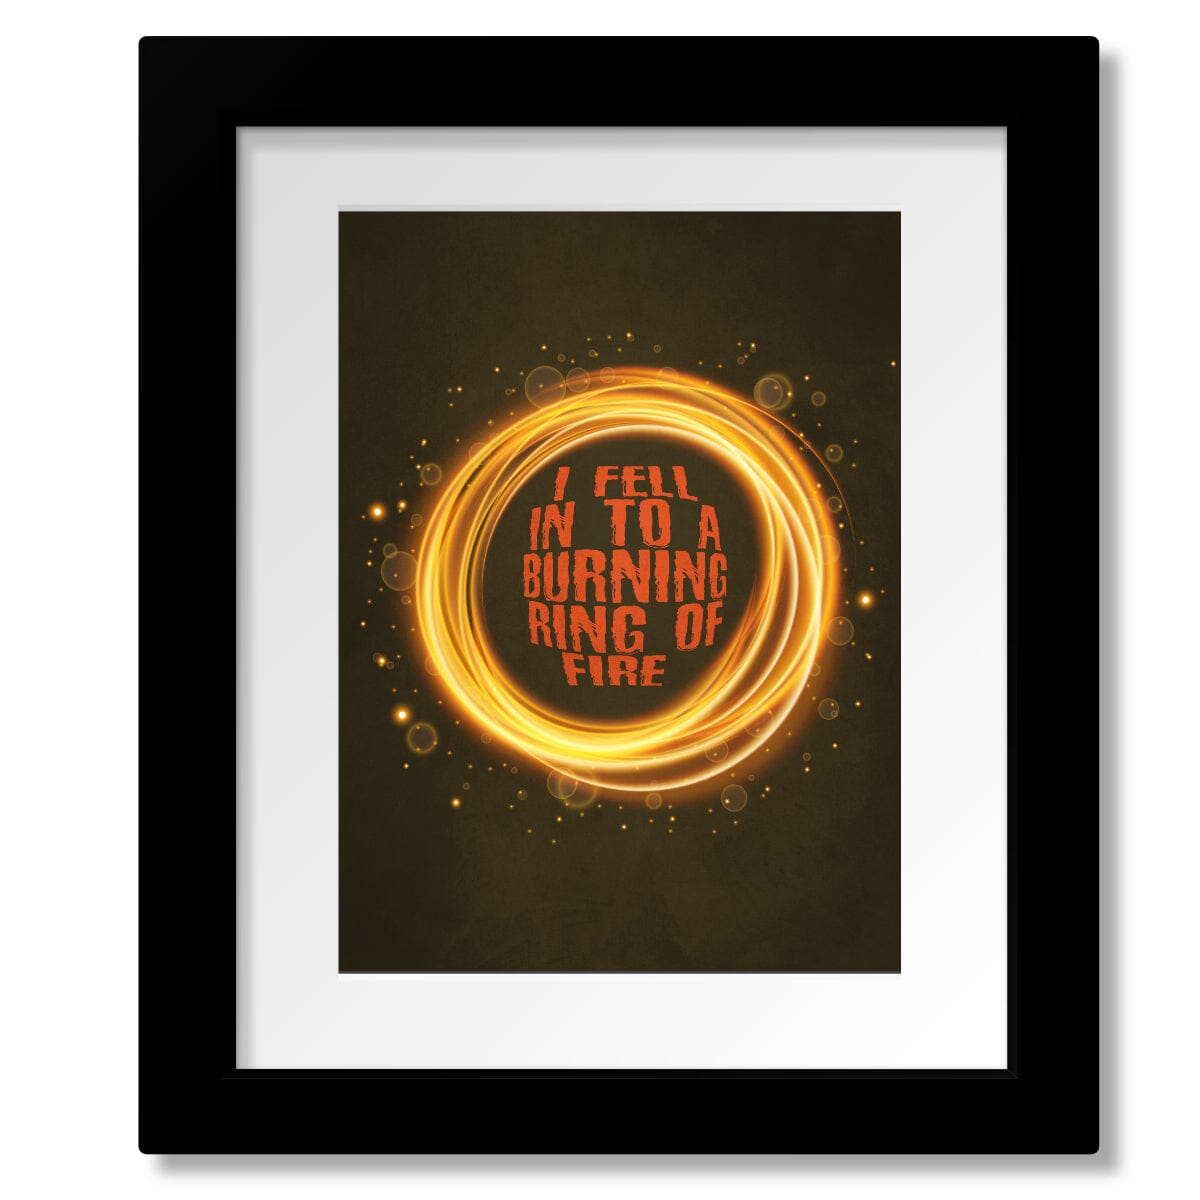 Ring of Fire by Johnny Cash - Country Music Song Lyrics Art Song Lyrics Art Song Lyrics Art 8x10 Matted and Framed Print 